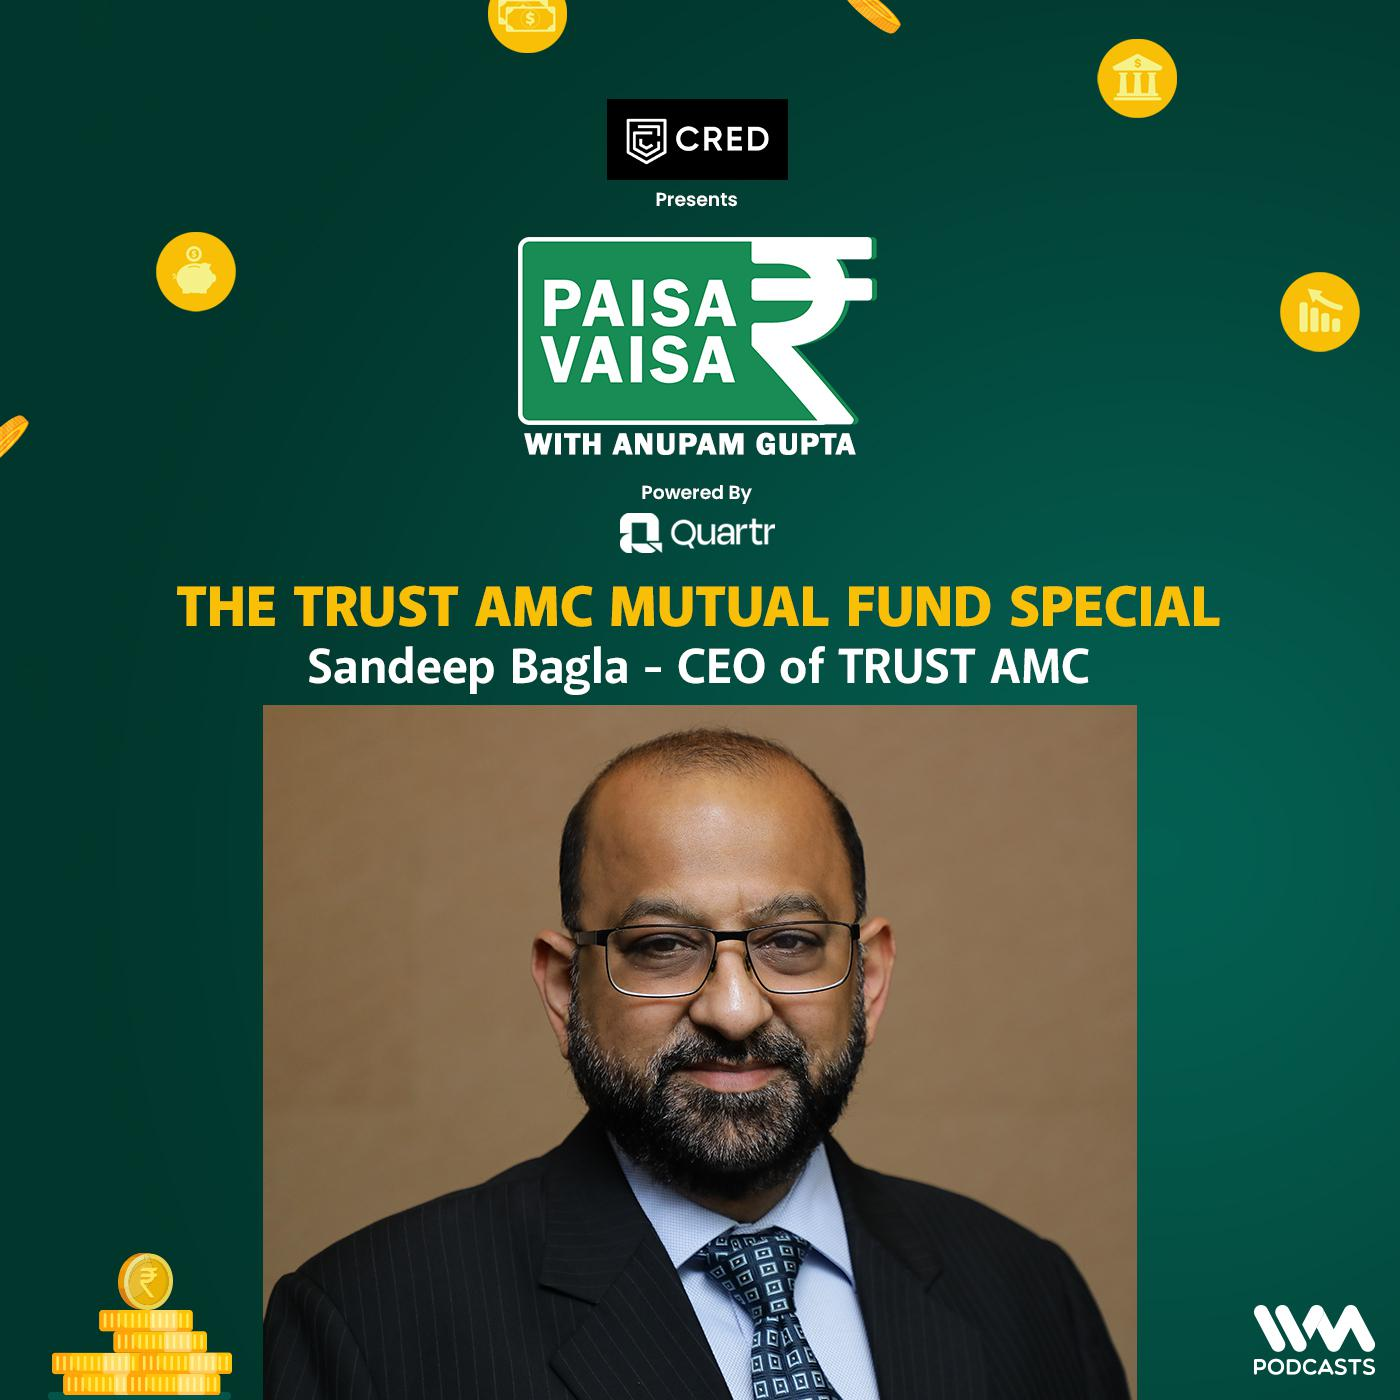 The TRUST AMC Mutual Fund Special